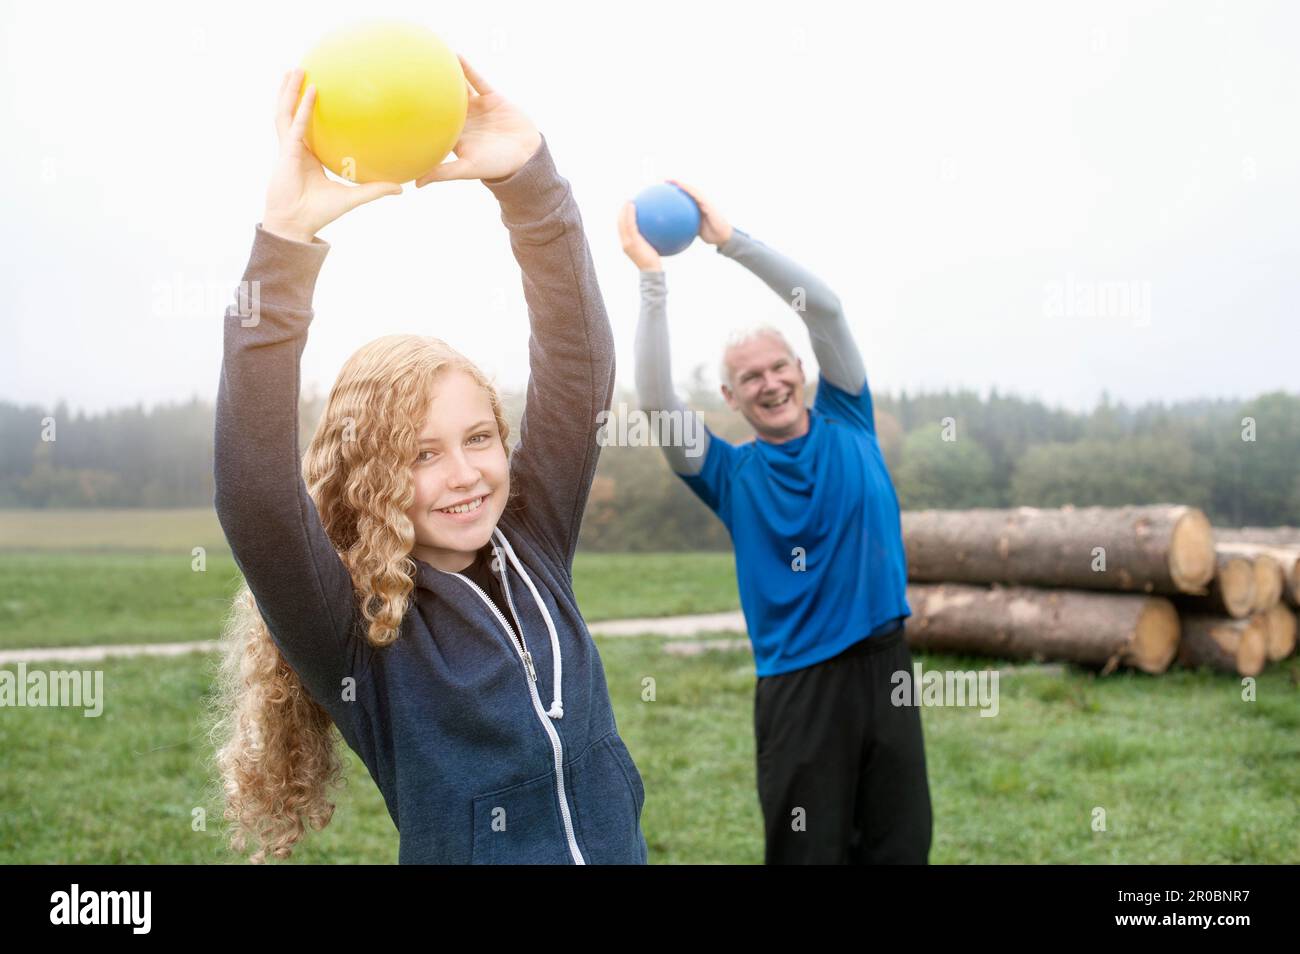 Teenage Girl with her father exercising with yoga ball on the field and smiling during dawn, Bavaria, Germany Stock Photo